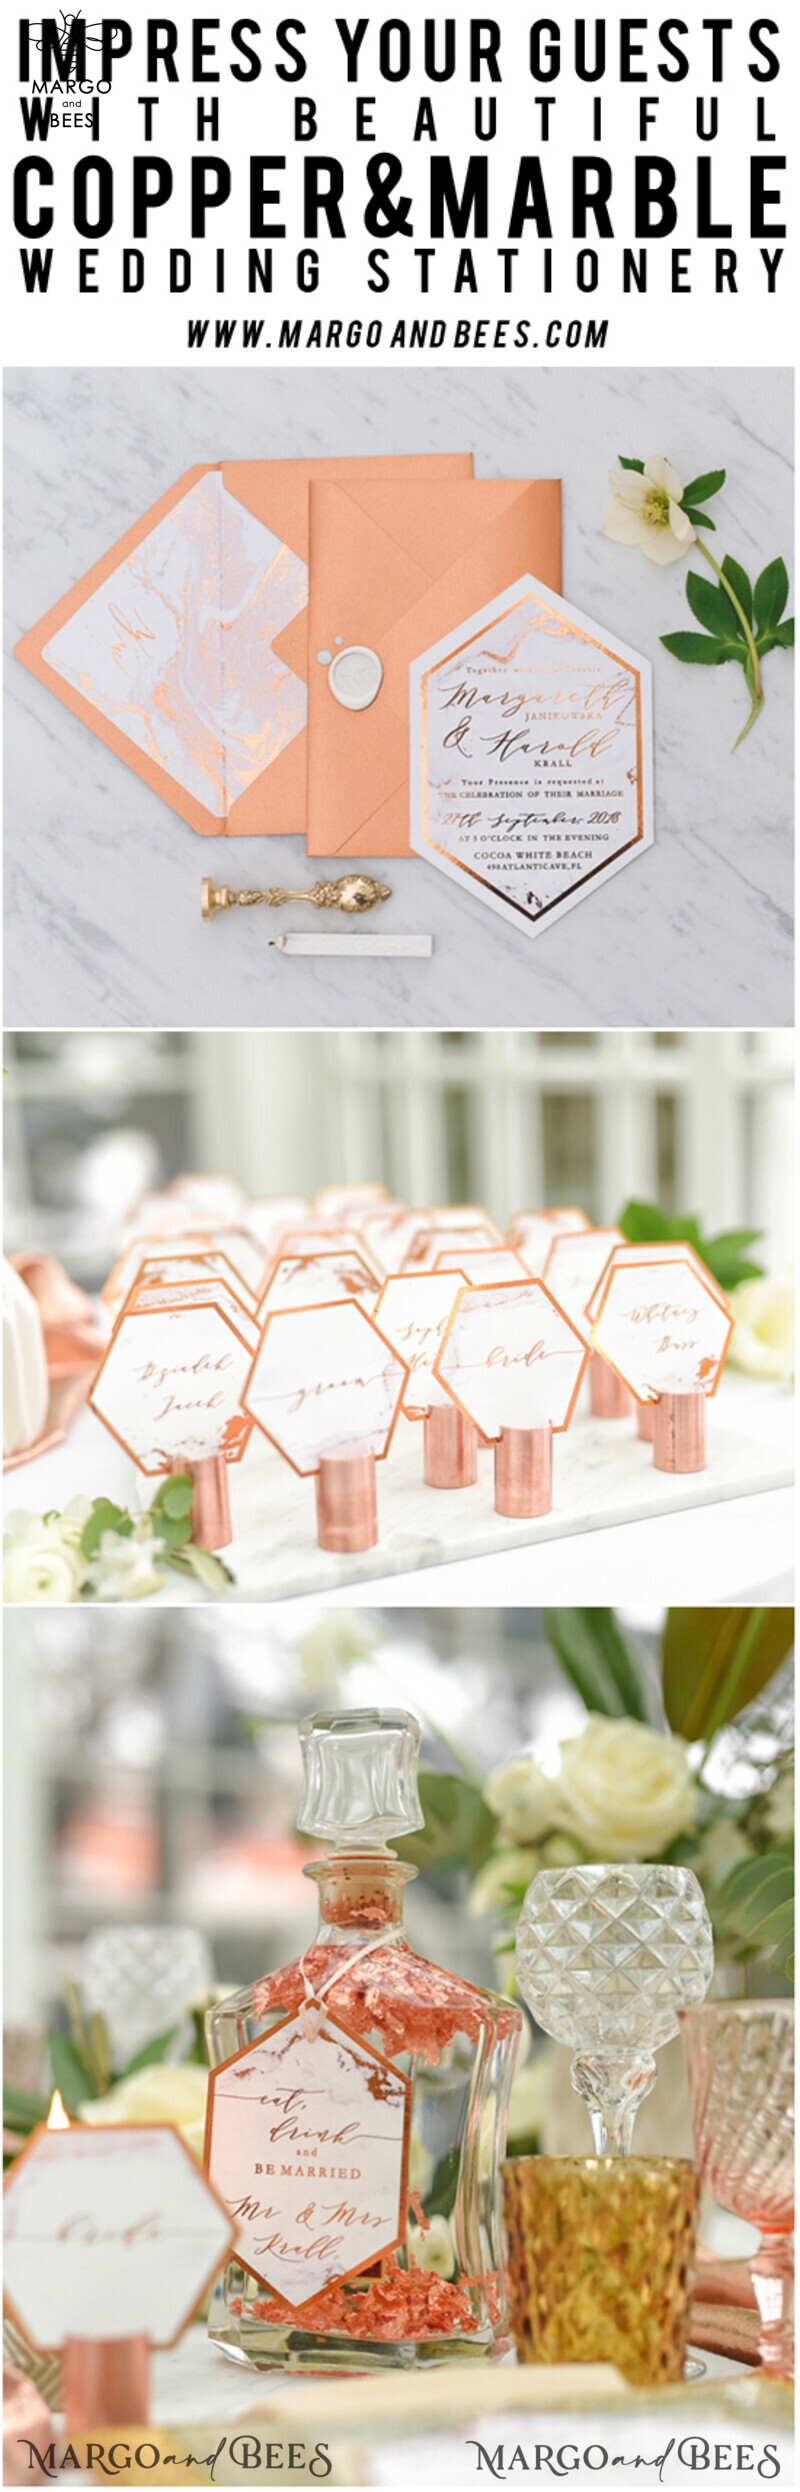 Luxury Copper Marble Wedding Invitations: Glamour and Elegance Combined
Glamour Glitter Wedding Invites: Sparkling and Sophisticated
Elegant Geometric Wedding Cards: Modern and Chic Stationery
Bespoke Orange Wedding Stationery: Customized and Vibrant Designs-8